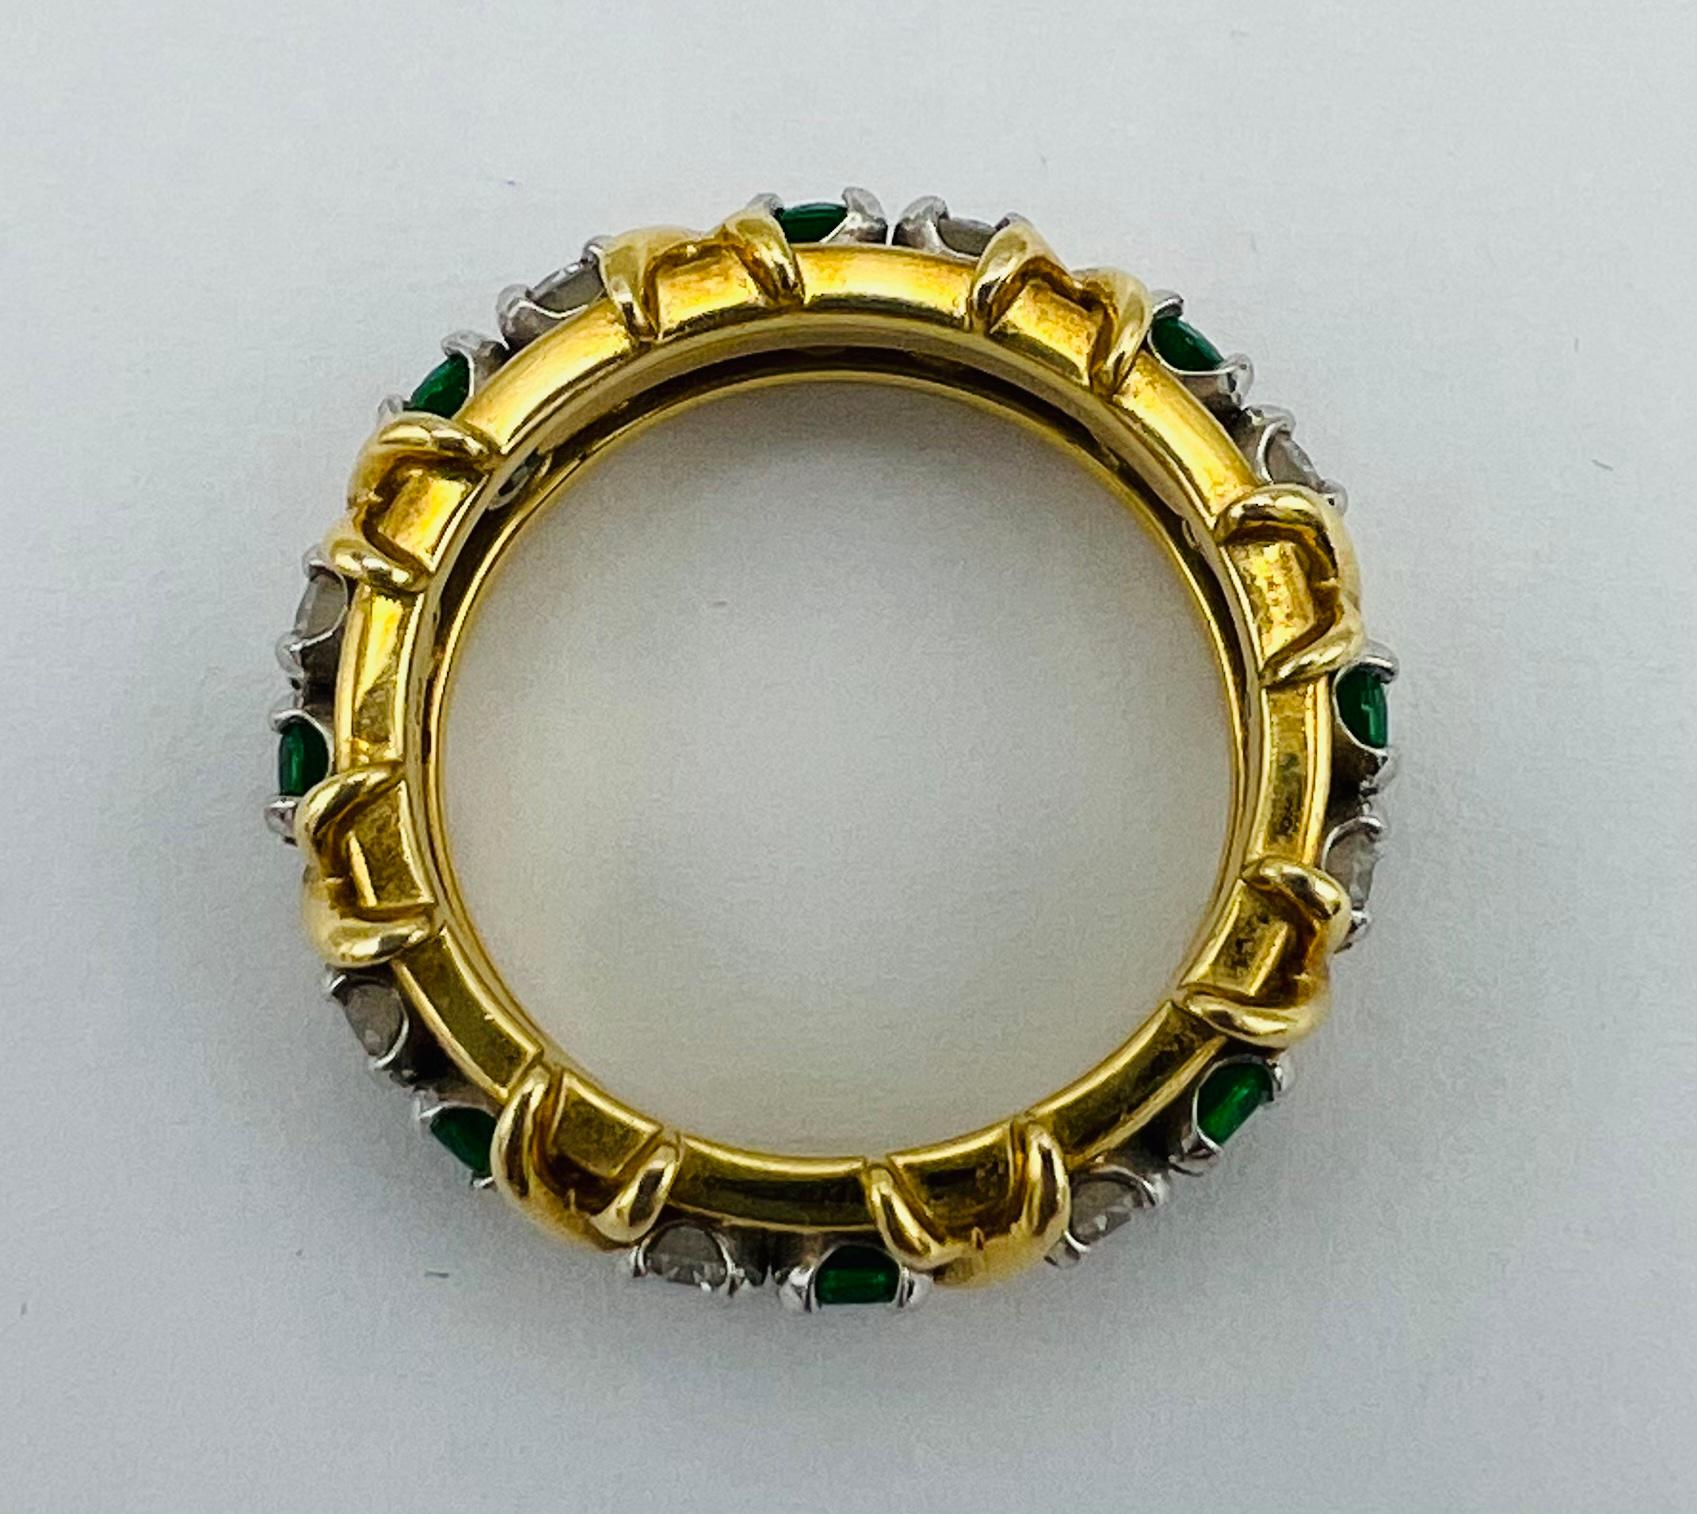 Product details:

The ring made out of 18k yellow gold and platinum with 16 stones around it, including 0.65 carat of round brilliant cut diamond and 0.65 carat of emerald. The ring features x motif around the band. The ring comes with the original